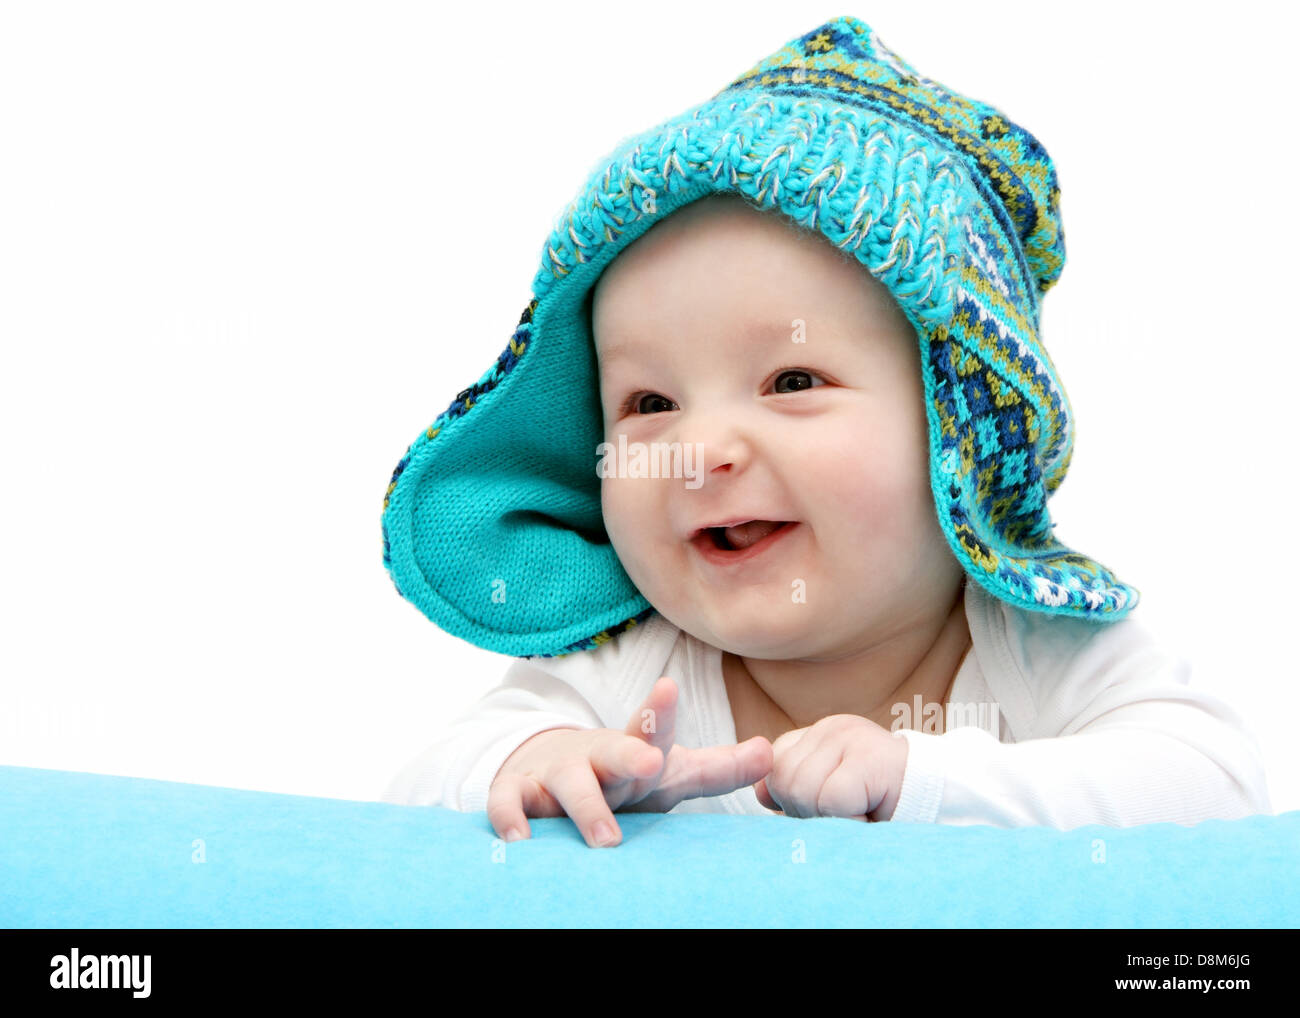 happy baby in knitted hat on stomach Stock Photo